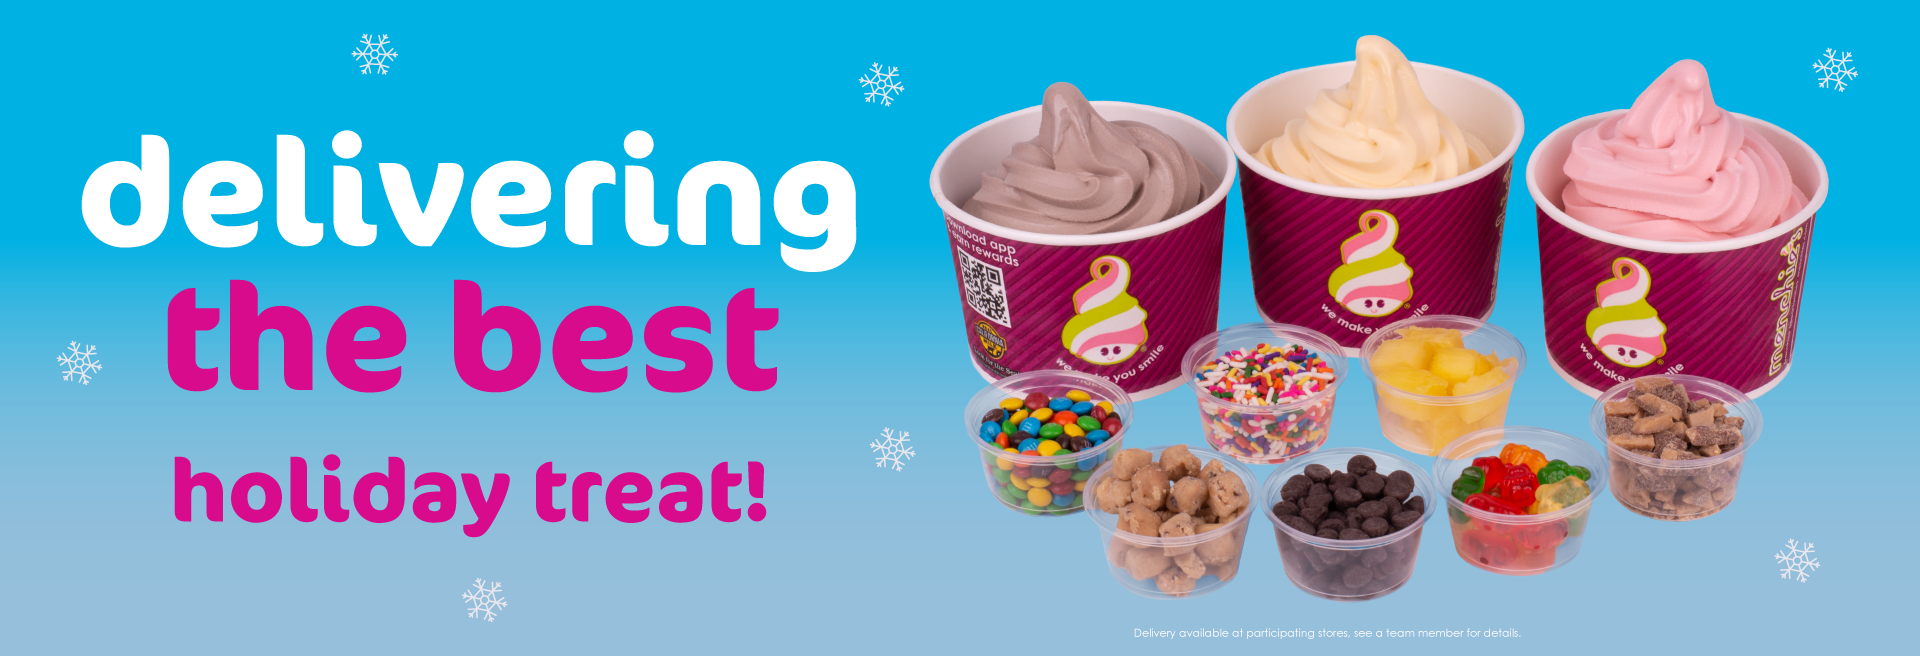 Make the holidays even sweeter with Menchie’s delivery!